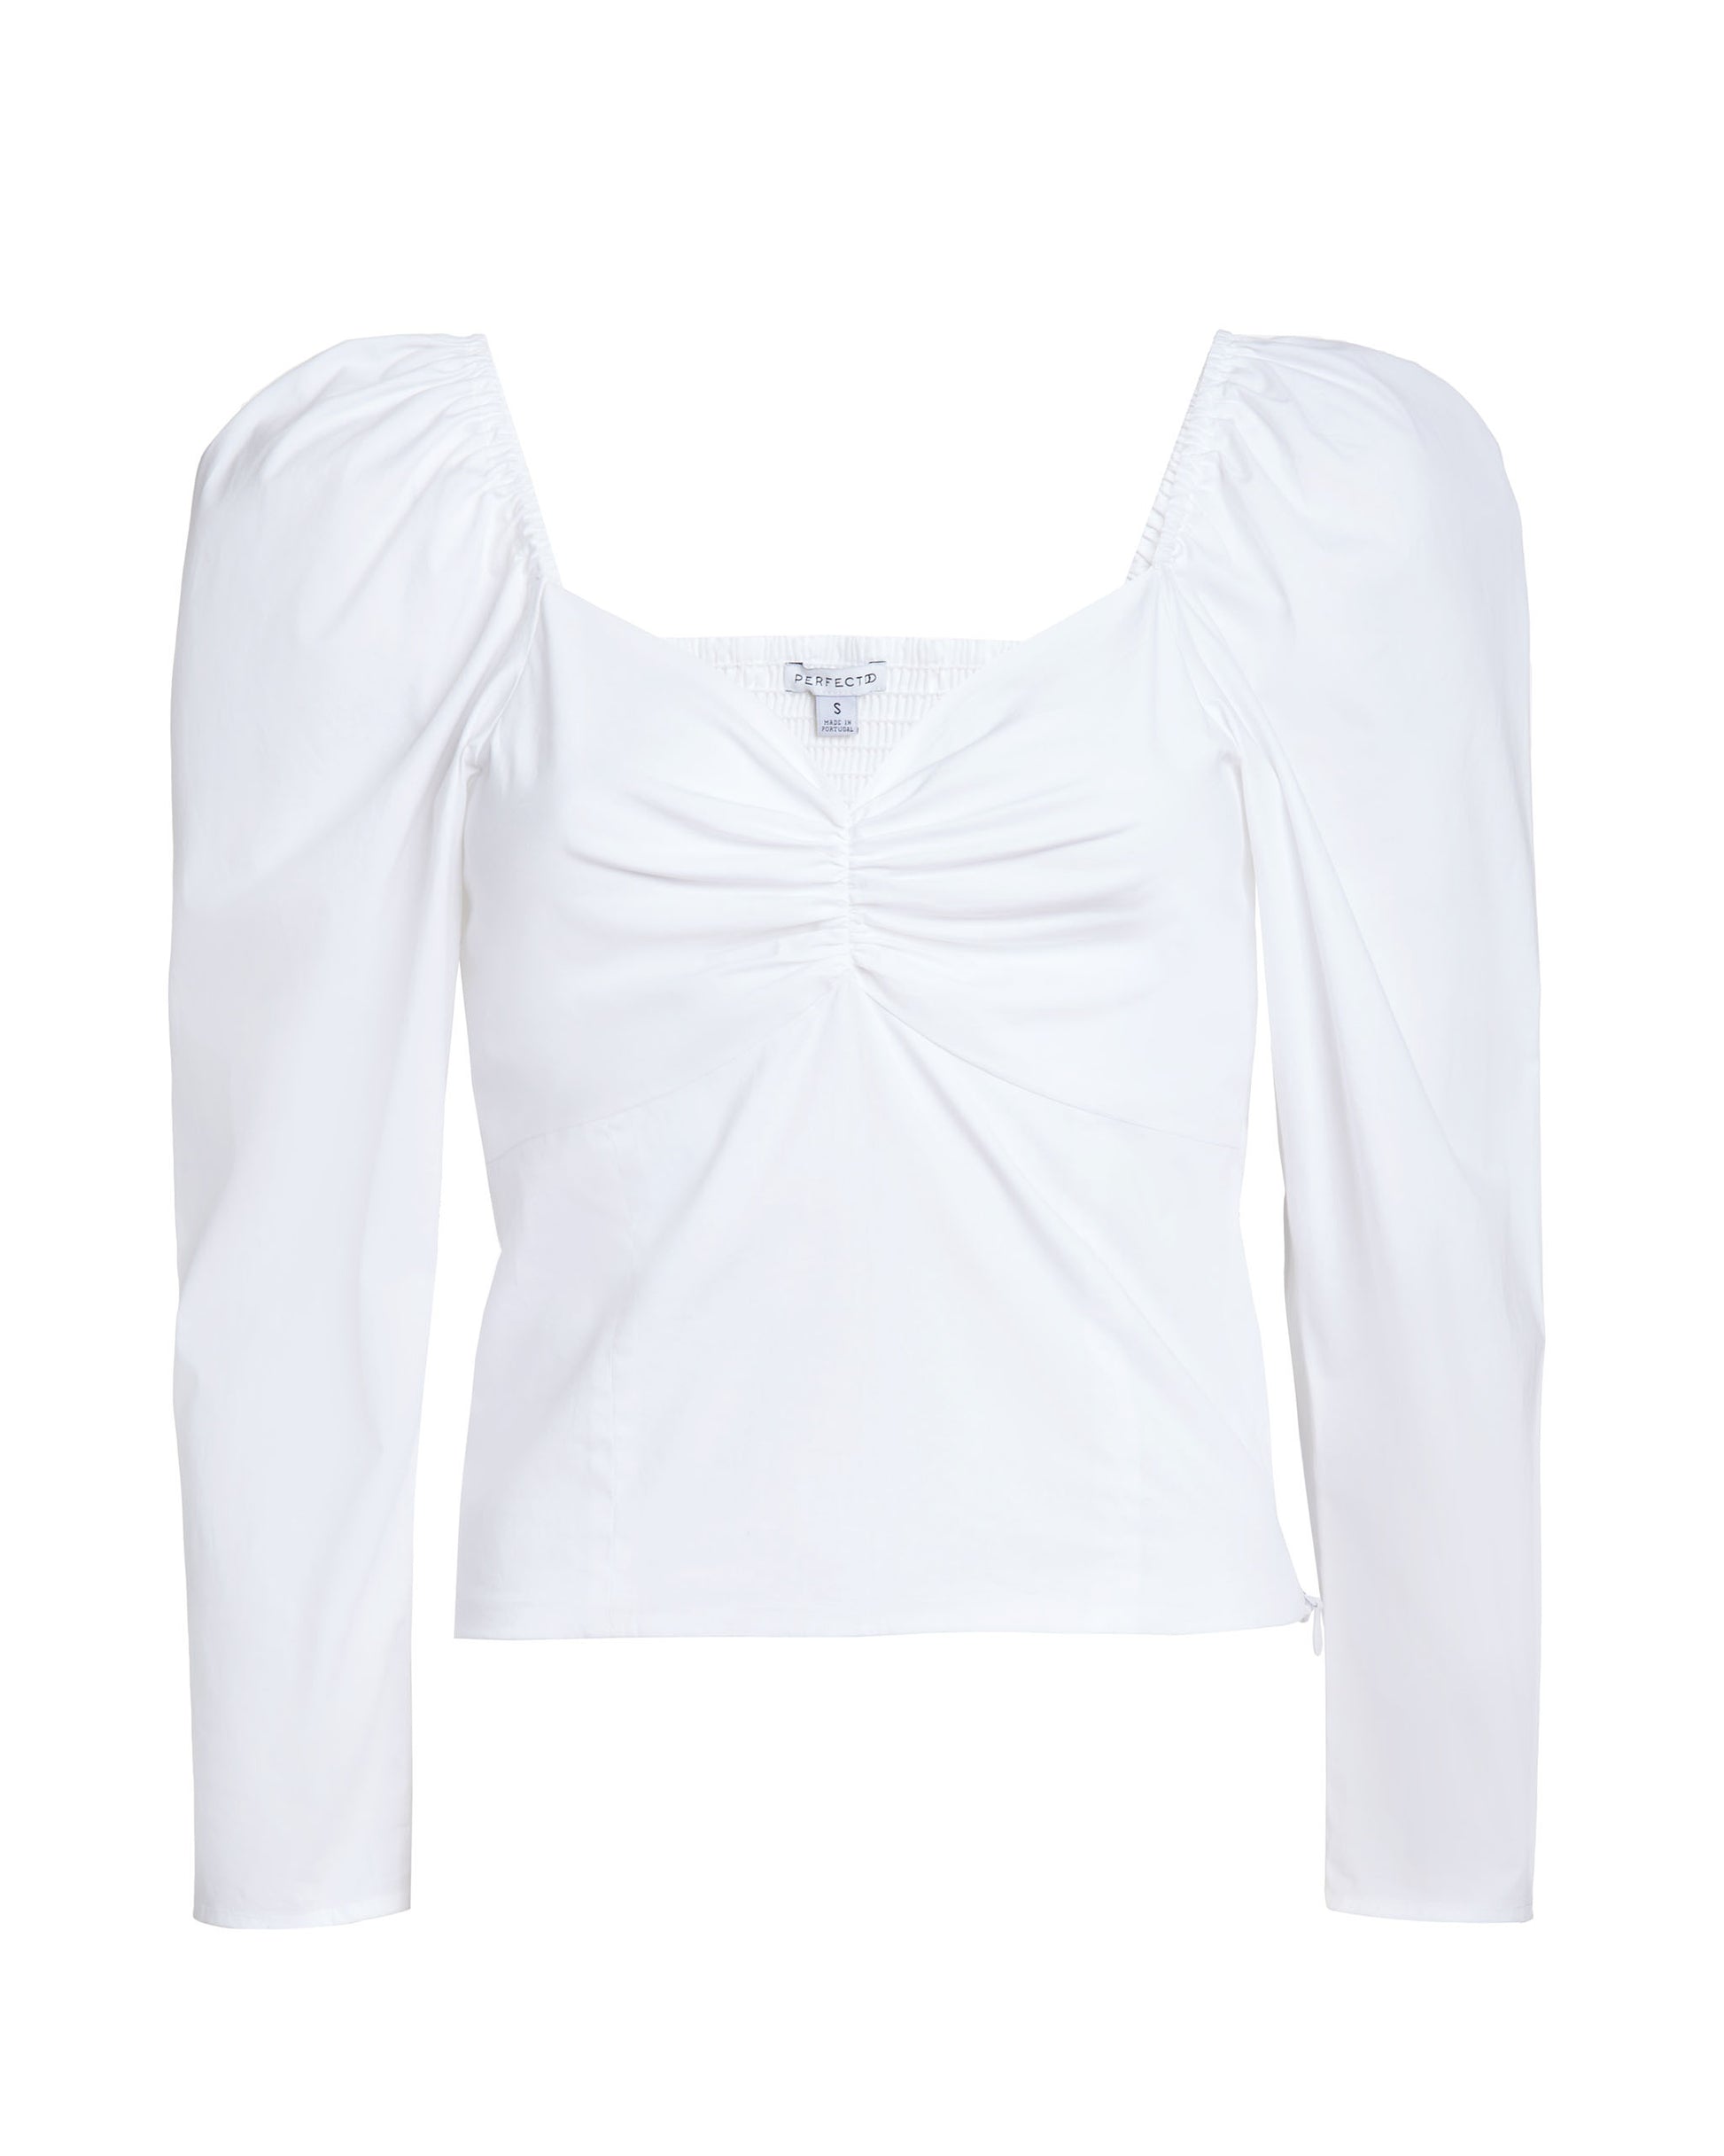 Front flat lay of white cotton top with sweetheart neckline